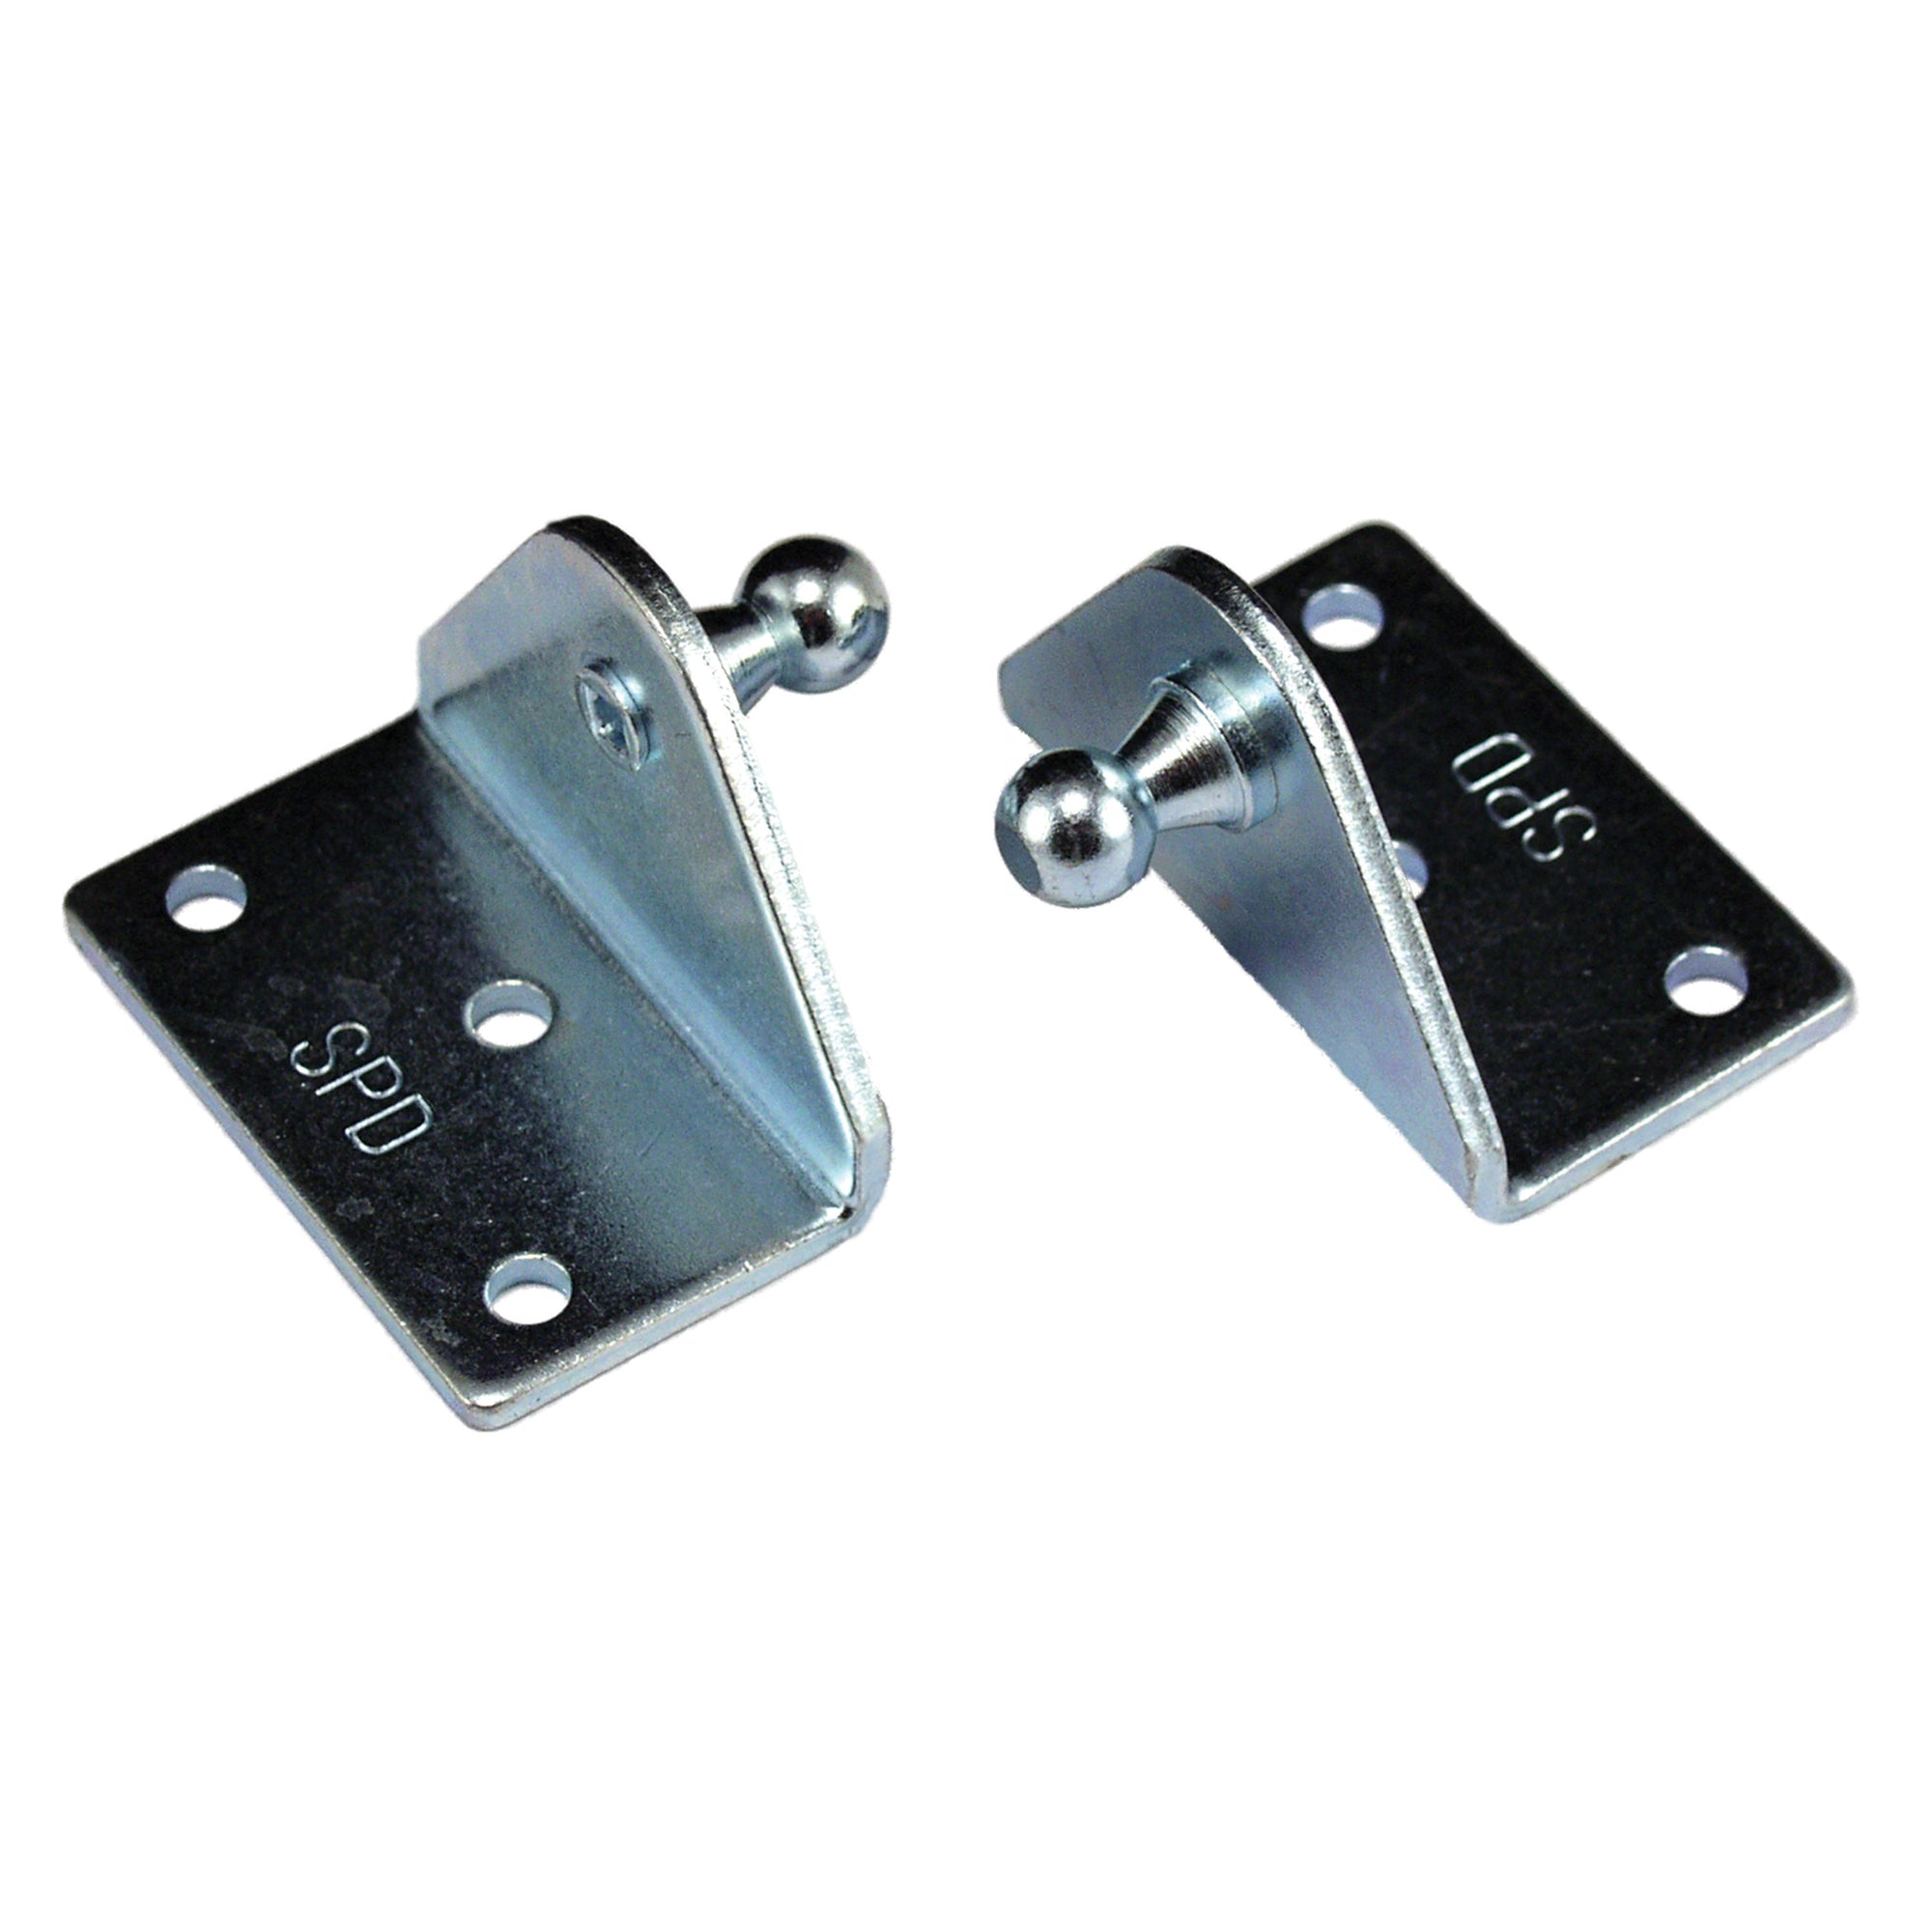 JR Products BR-1060 Gas Spring Mounting Bracket - Angled, Pack of 2